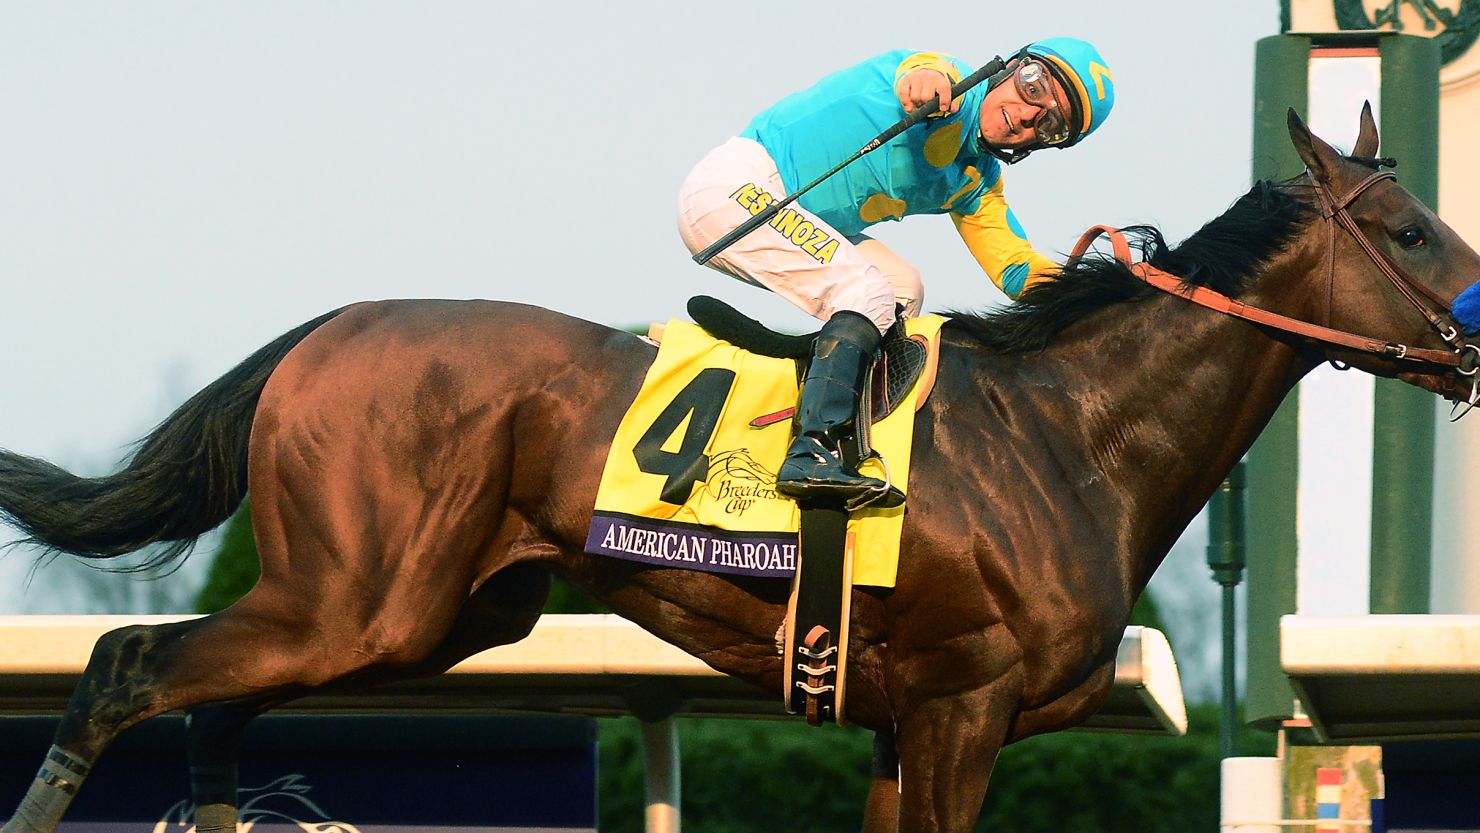 American Pharoah, ridden by Victor Espinoza, wins the Breeders' Cup Classic to cap his superb career.